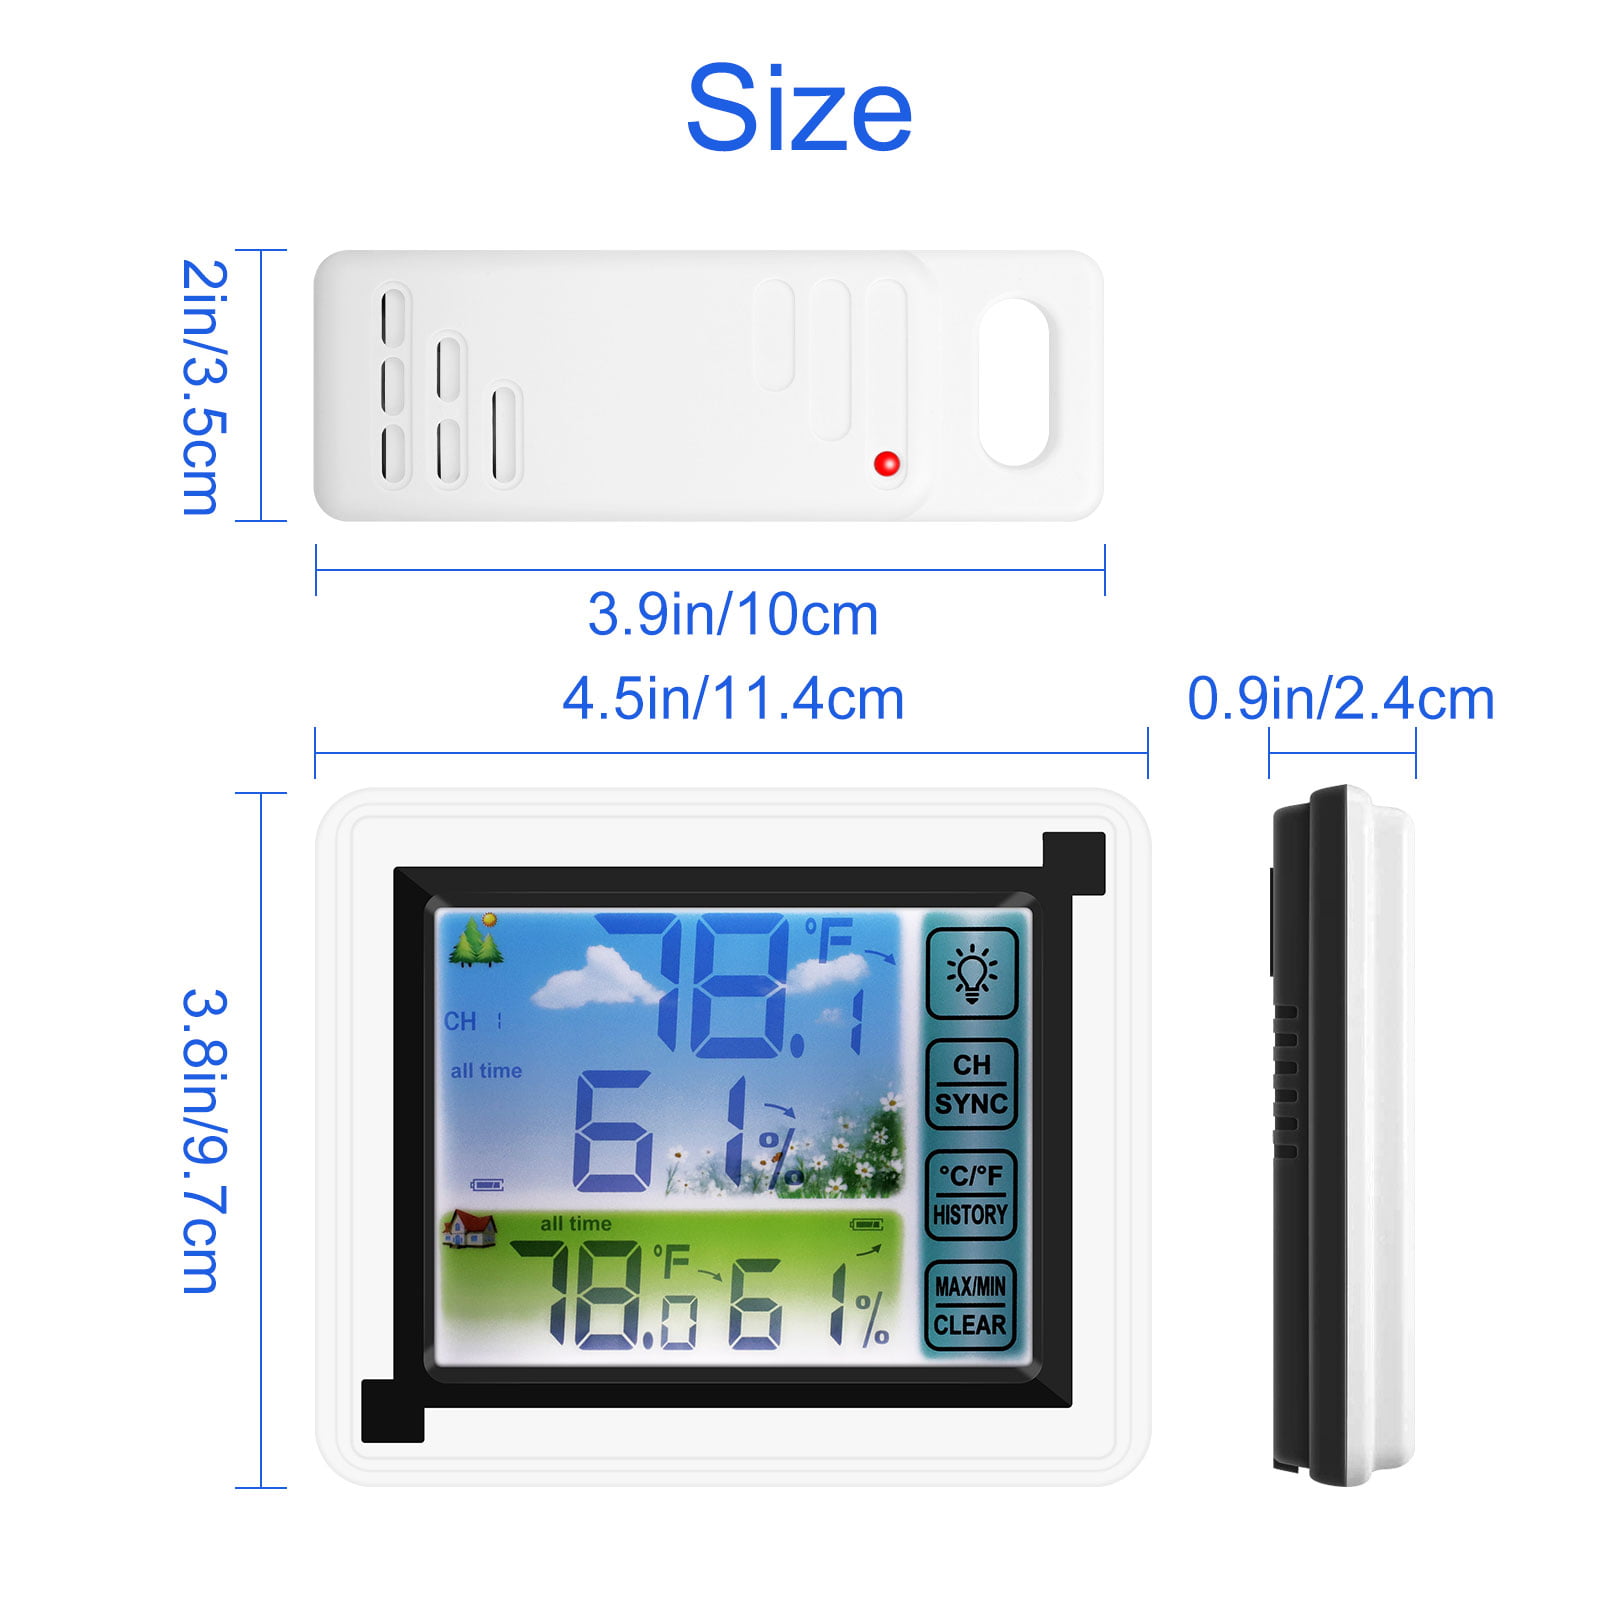 Wireless Weather Station Indoor Outdoor Thermometer, EEEkit Color LCD Display Digital Temperature Humidity Monitor, Weather Forecast Station with